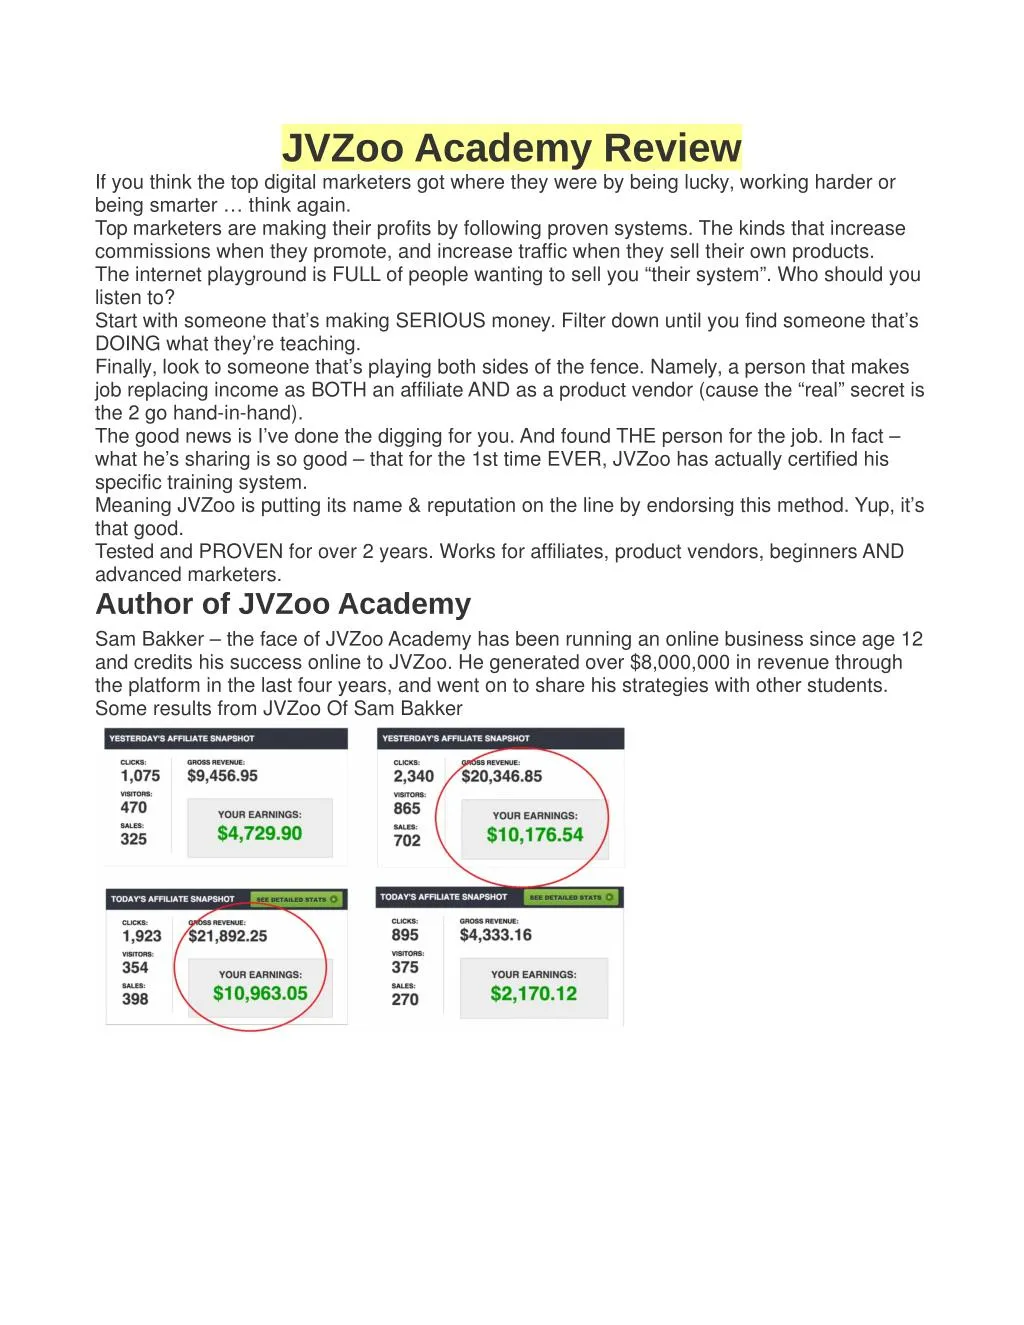 jvzoo academy review if you think the top digital